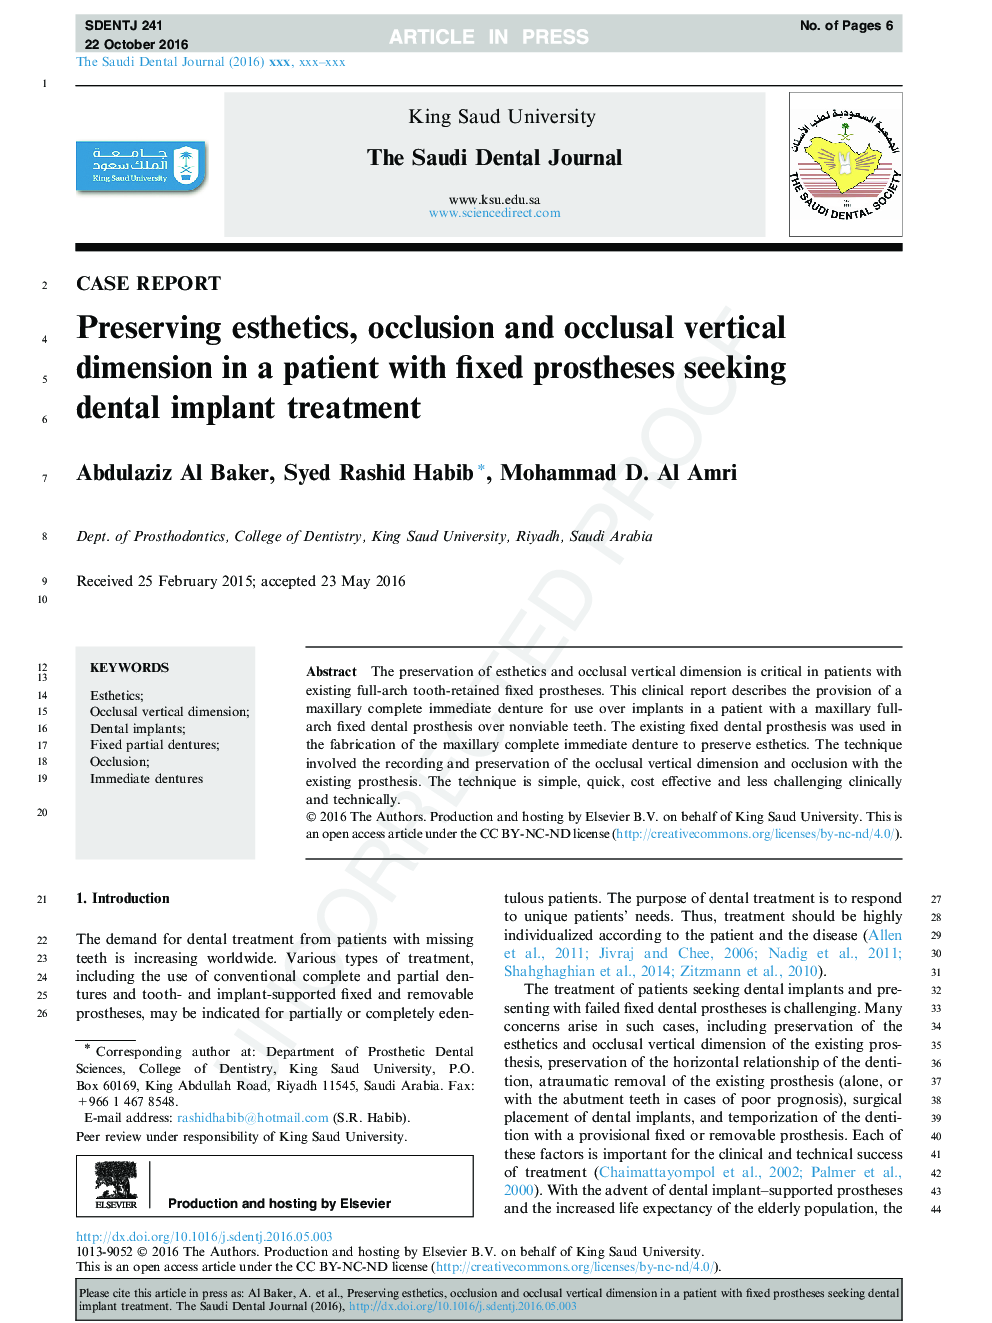 Preserving esthetics, occlusion and occlusal vertical dimension in a patient with fixed prostheses seeking dental implant treatment